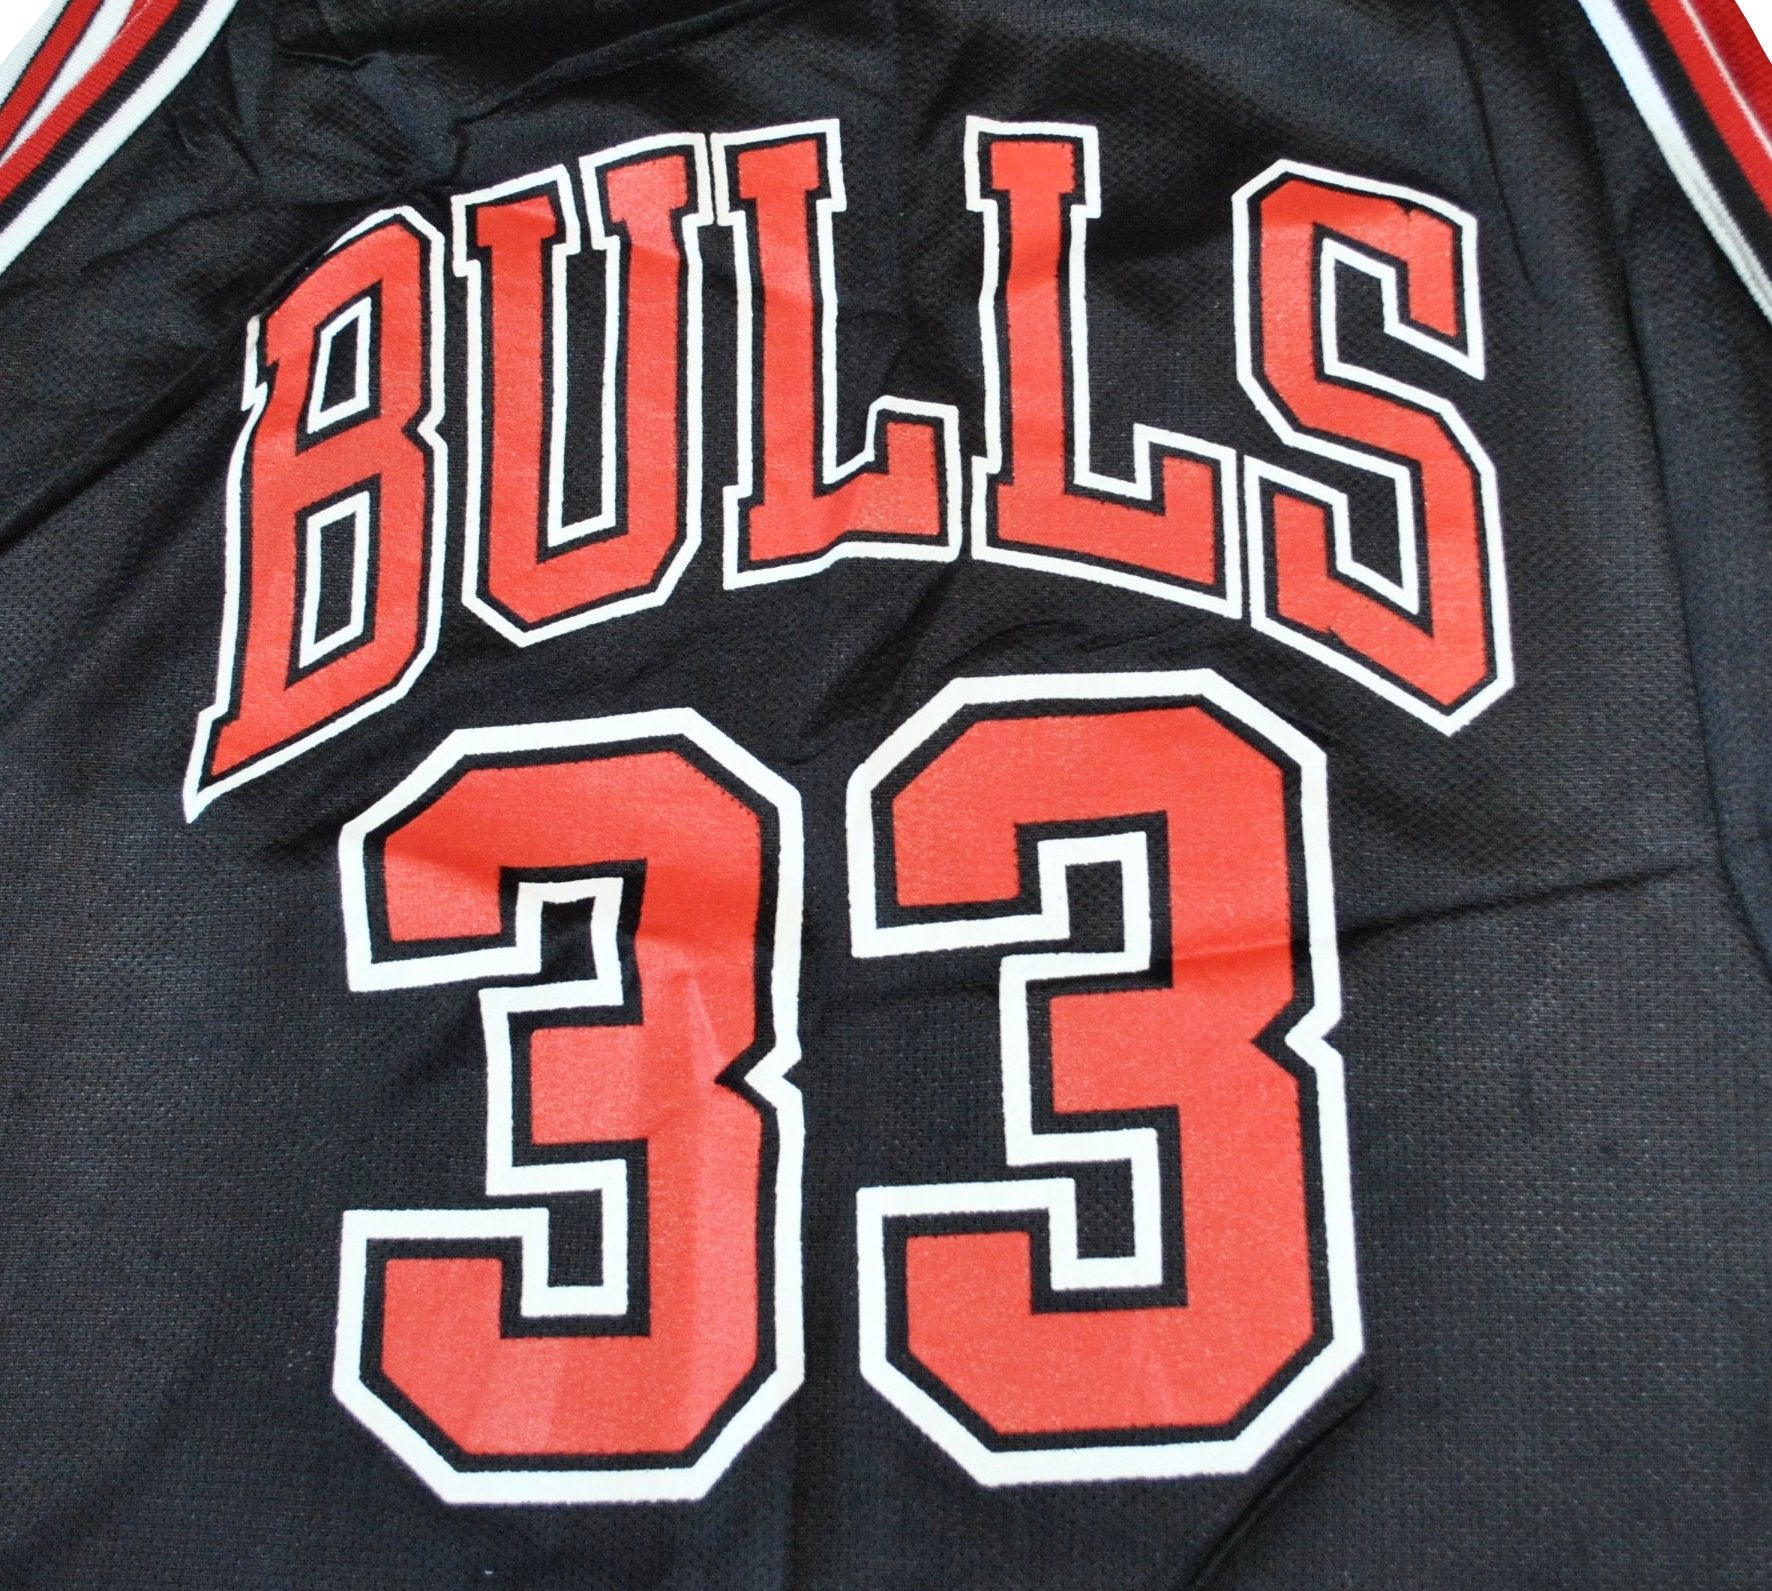 NWT Scottie Pippen Champion Jersey 44 Large Chicago Bulls 50th